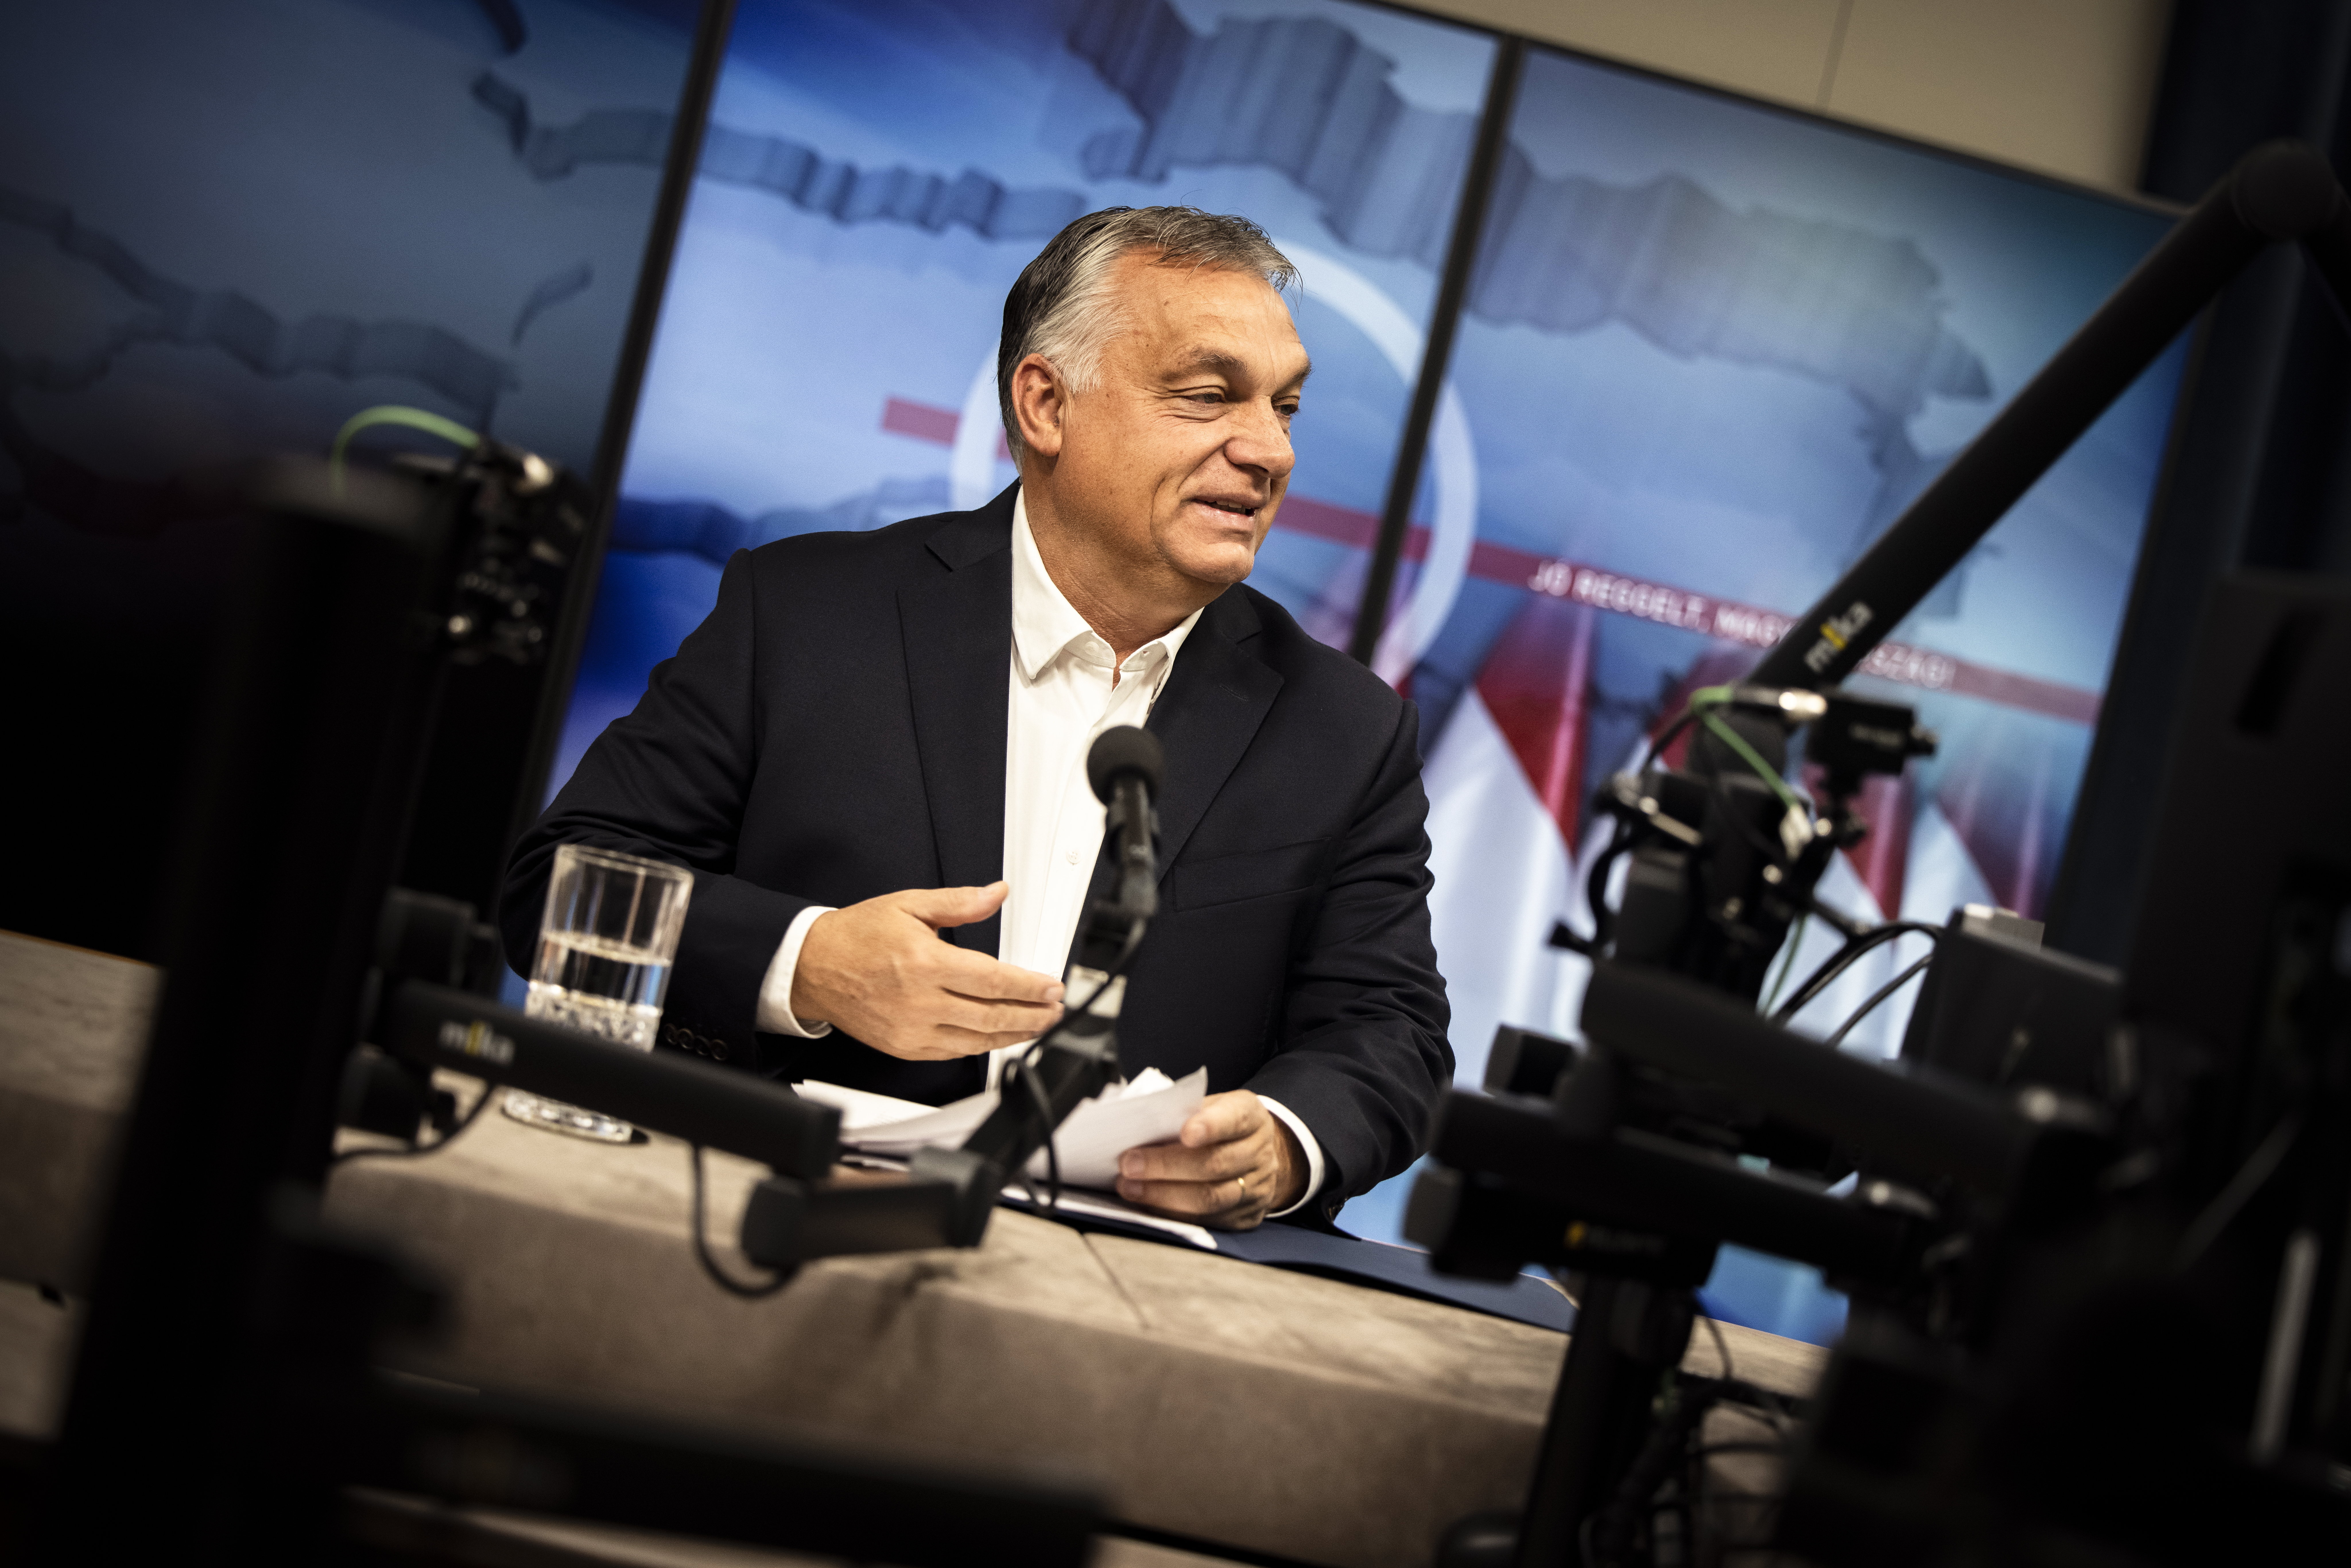 Viktor Orbán: there was a discussion among the representatives about the admission of Finland to NATO